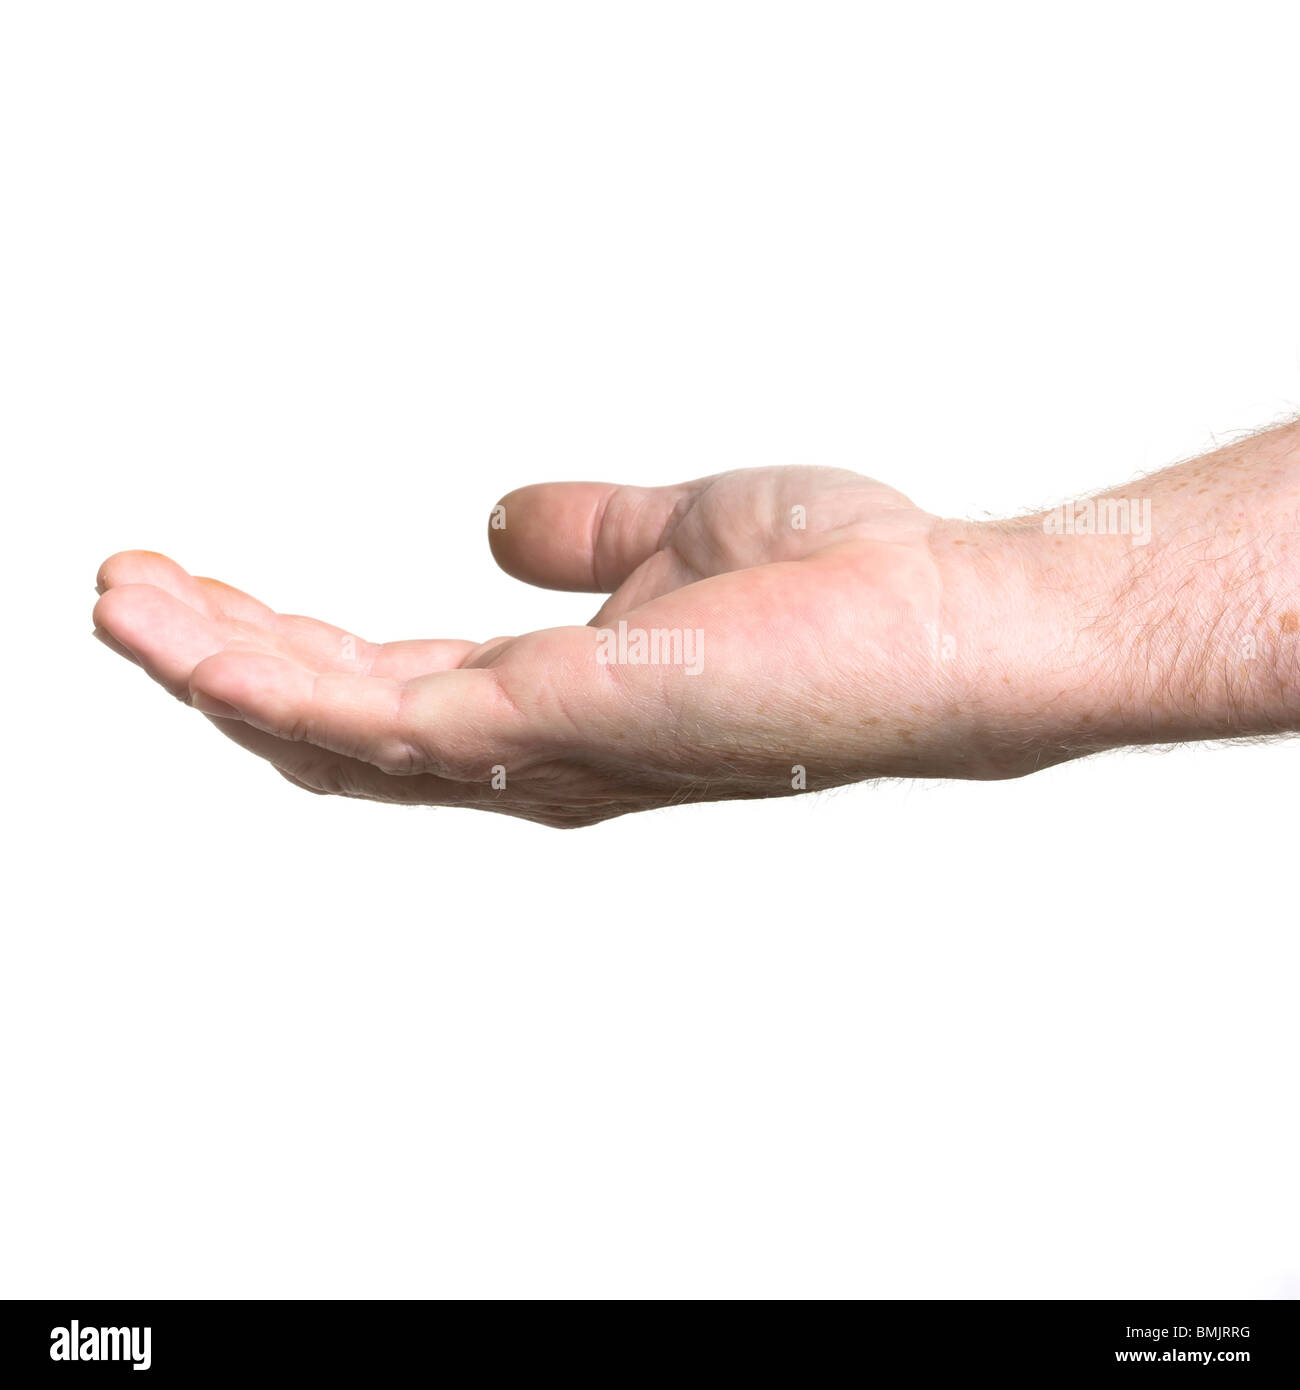 Open Palm hand gesture of male hand isolated against white background. Stock Photo